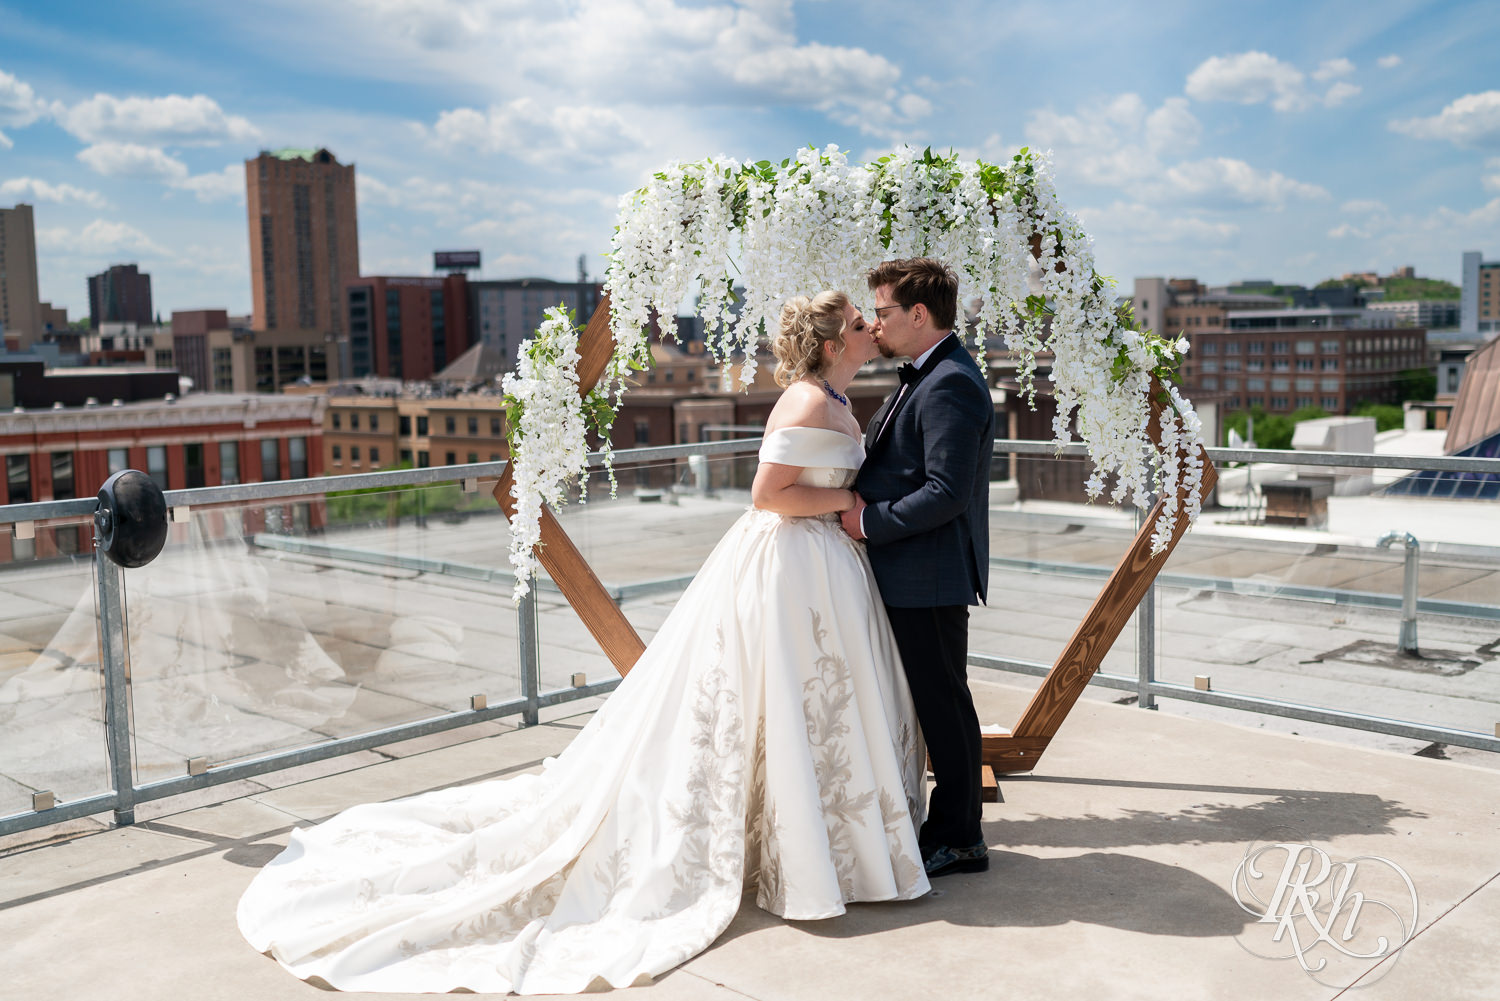 Bride and groom kiss on rooftop at Abulae in Saint Paul, Minnesota.